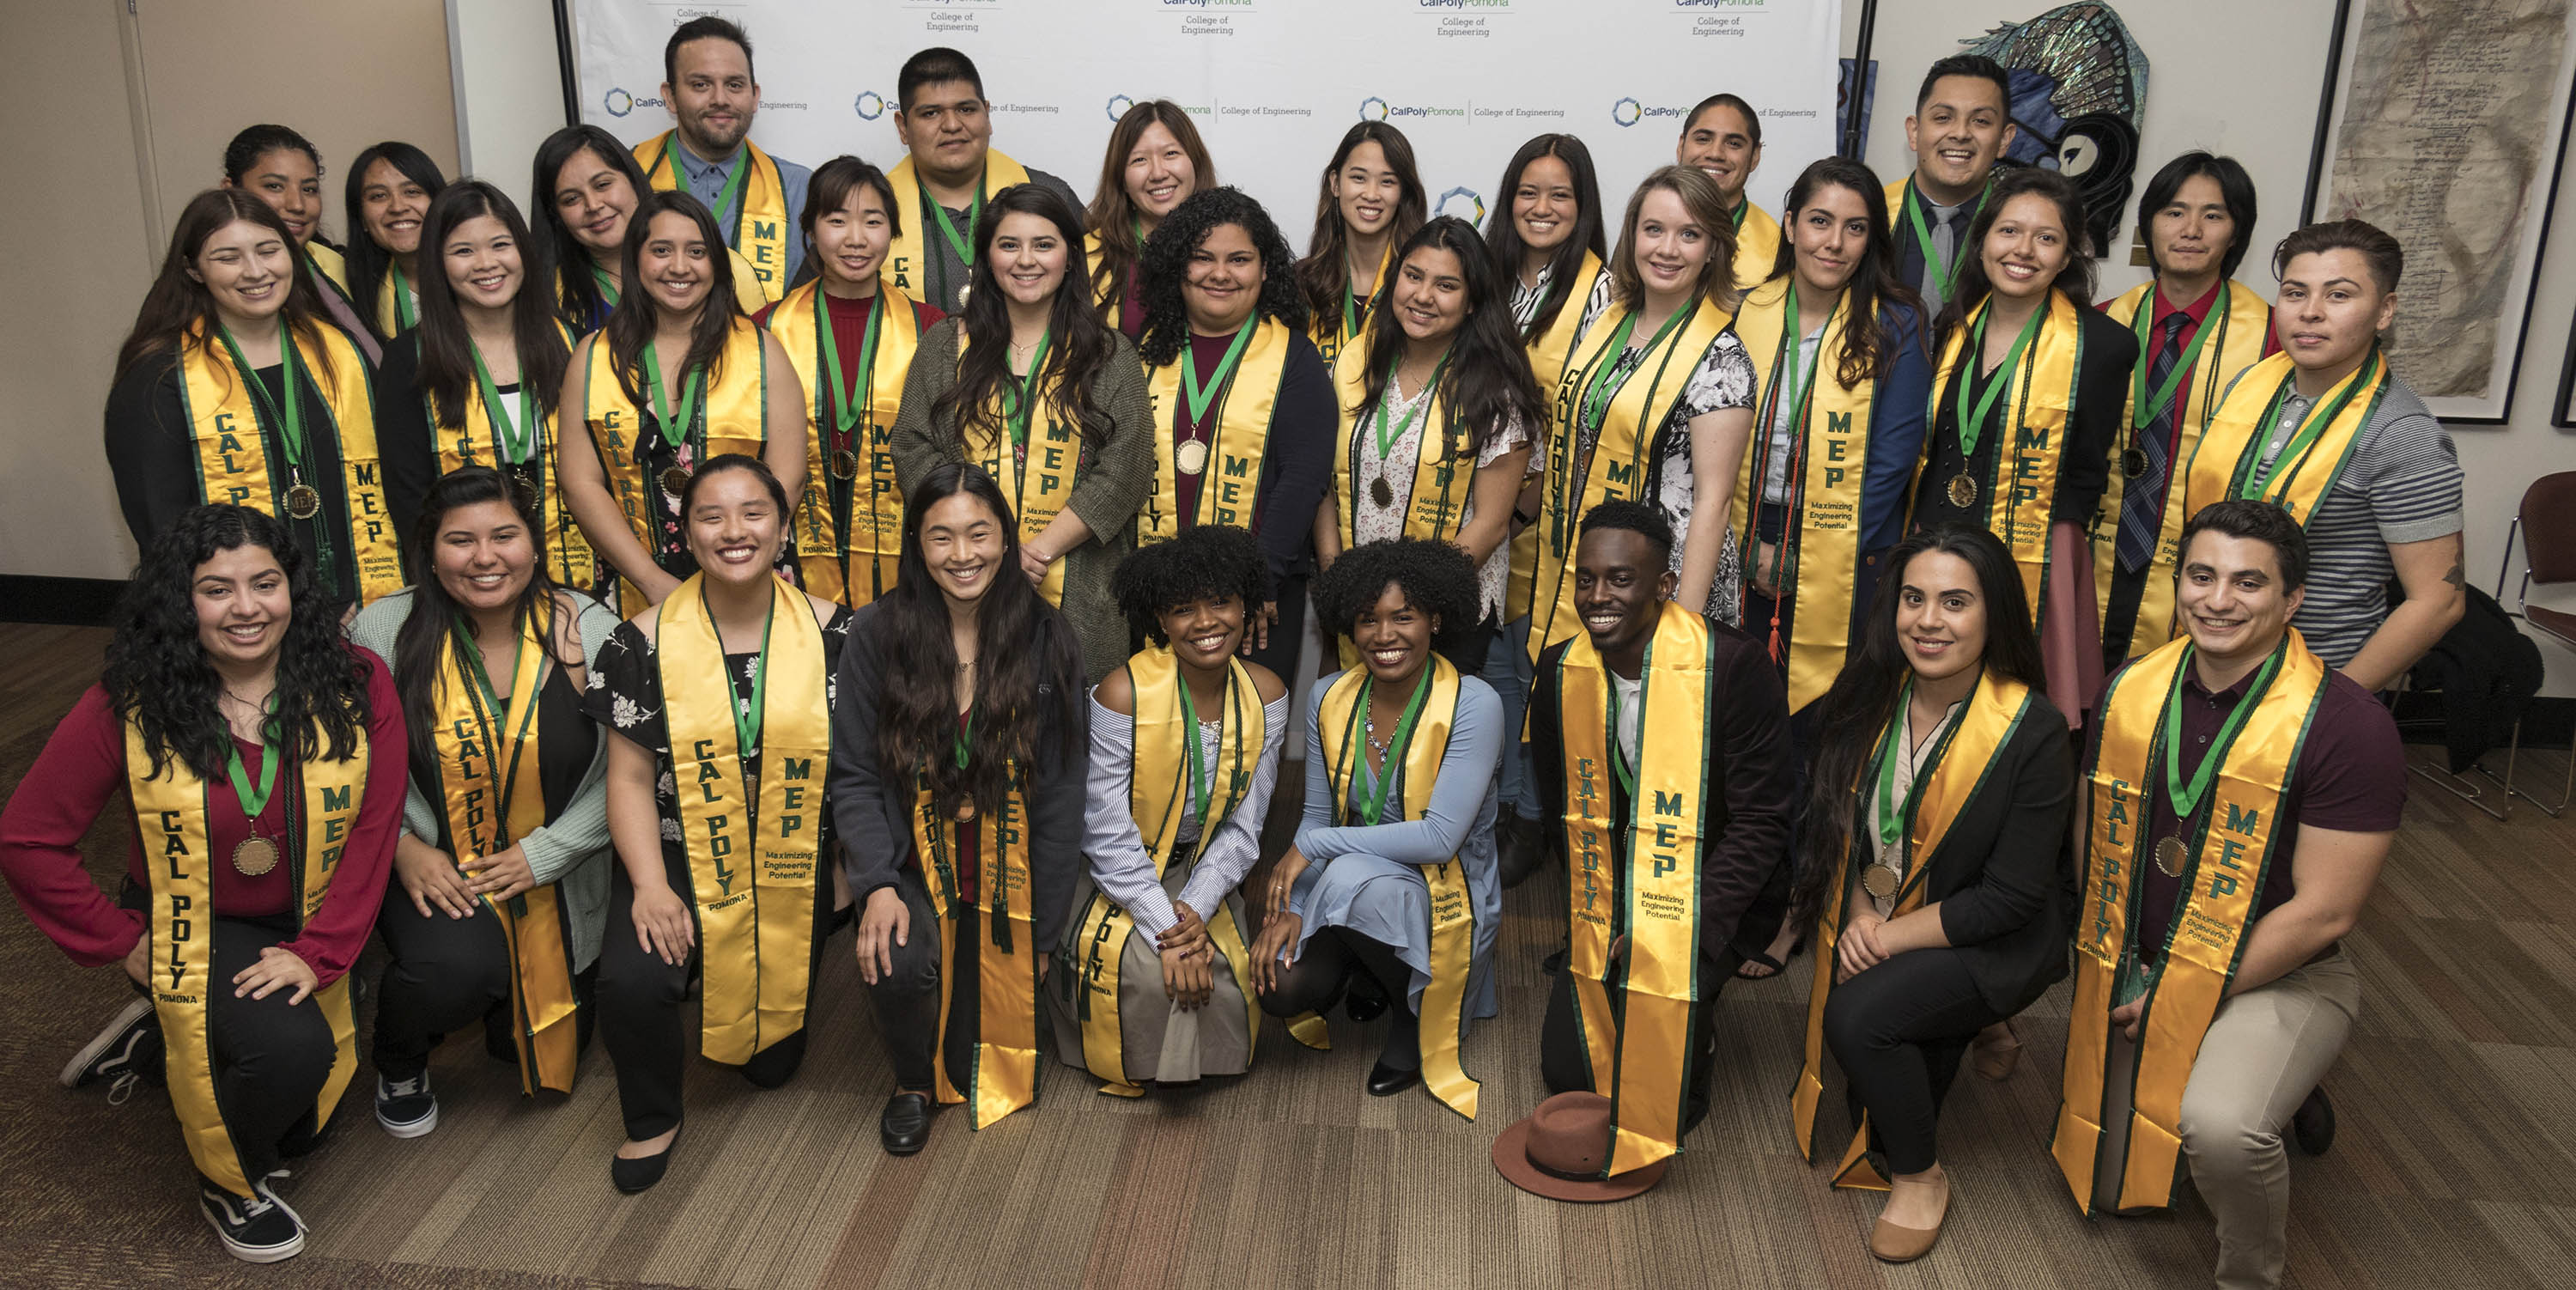 A group of college students with their graduation cords and sashes.